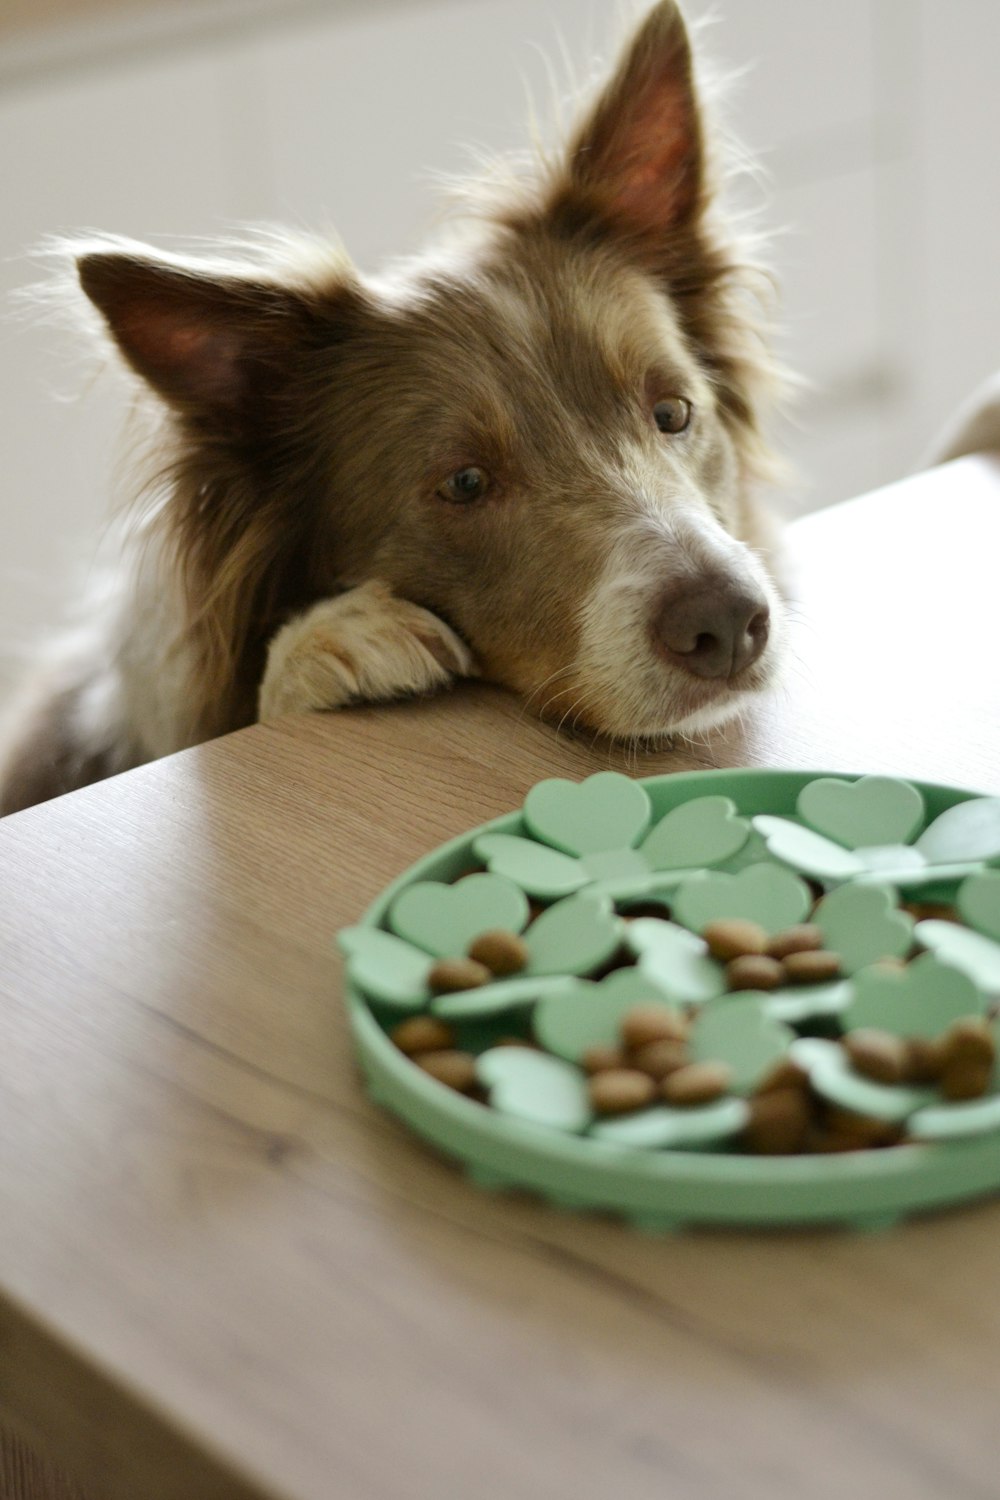 a dog laying on a table next to a plate of food